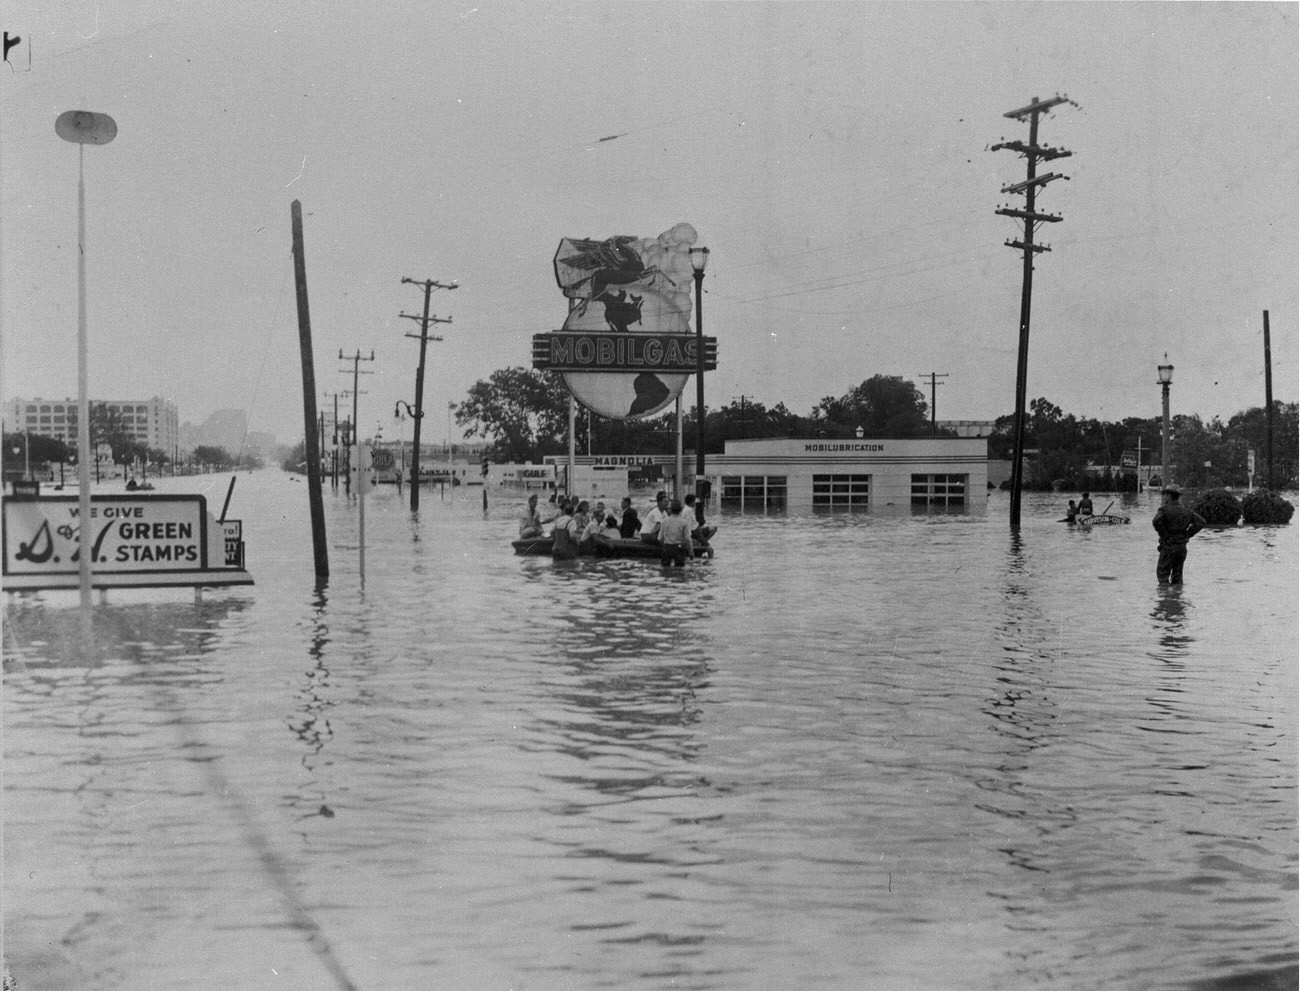 1949 flood, flooded street, Green Stamps sign and Mobil Gas station, 7th St., University Dr., Camp Bowie intersection, Fort Worth